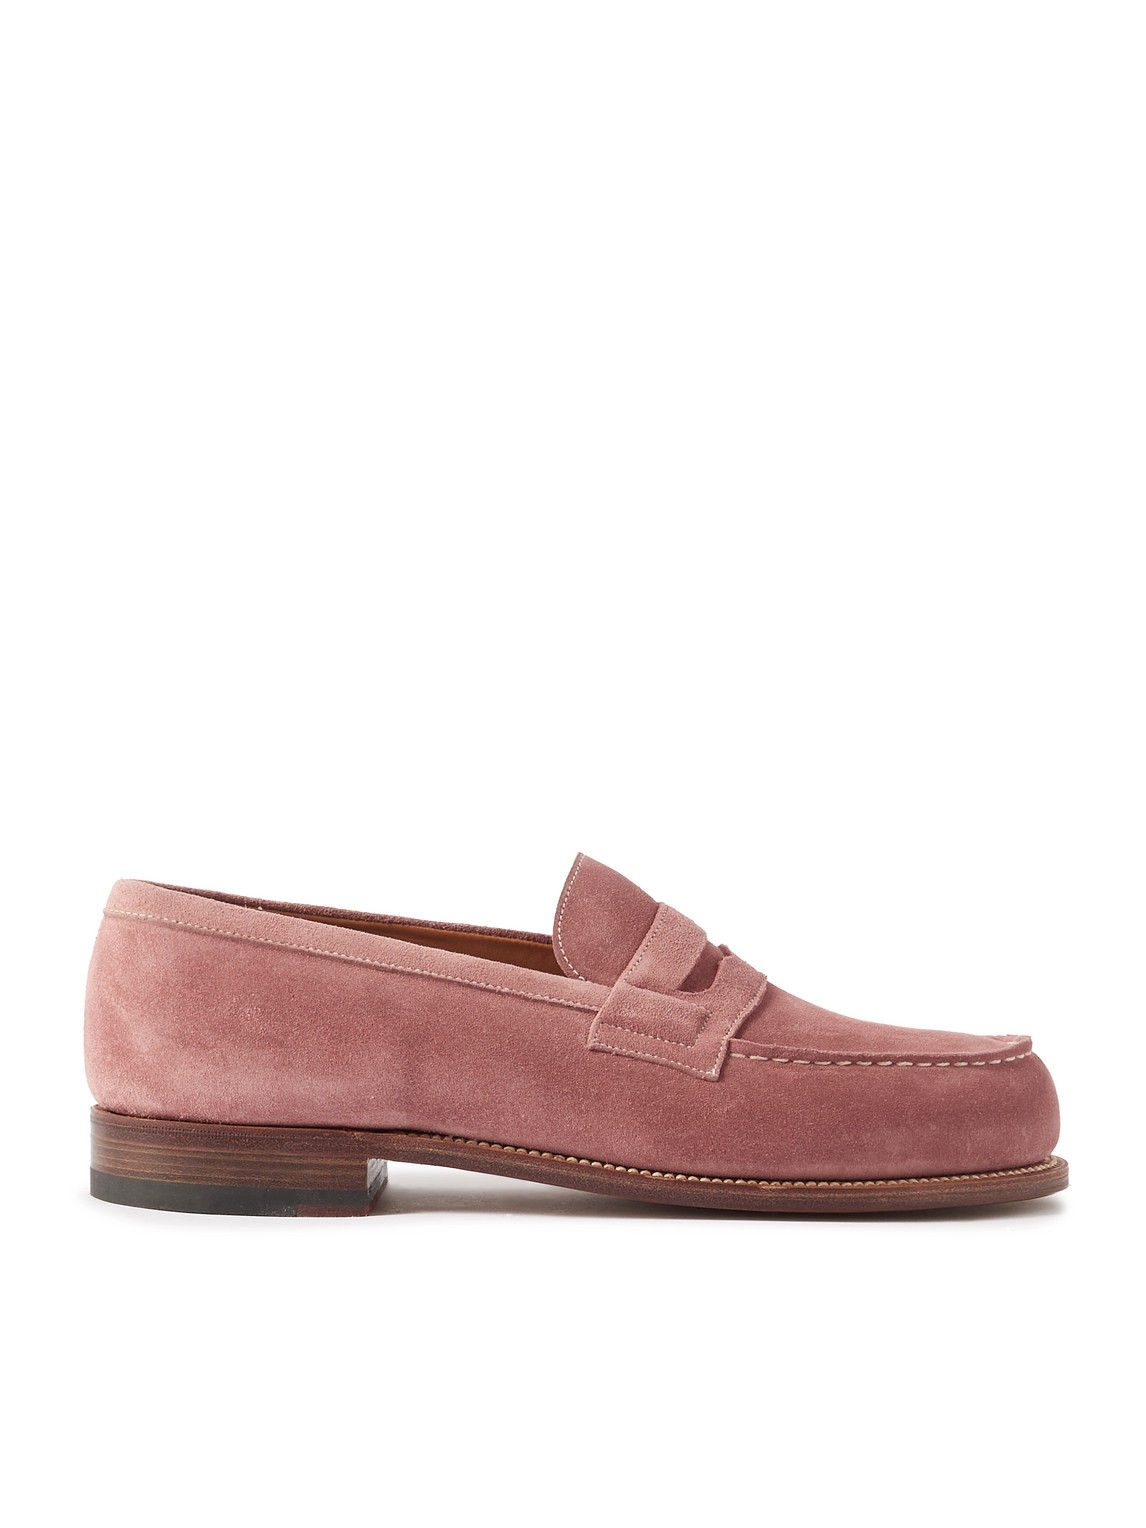 Jm Weston 180 Moccasin Suede Penny Loafers In Pink